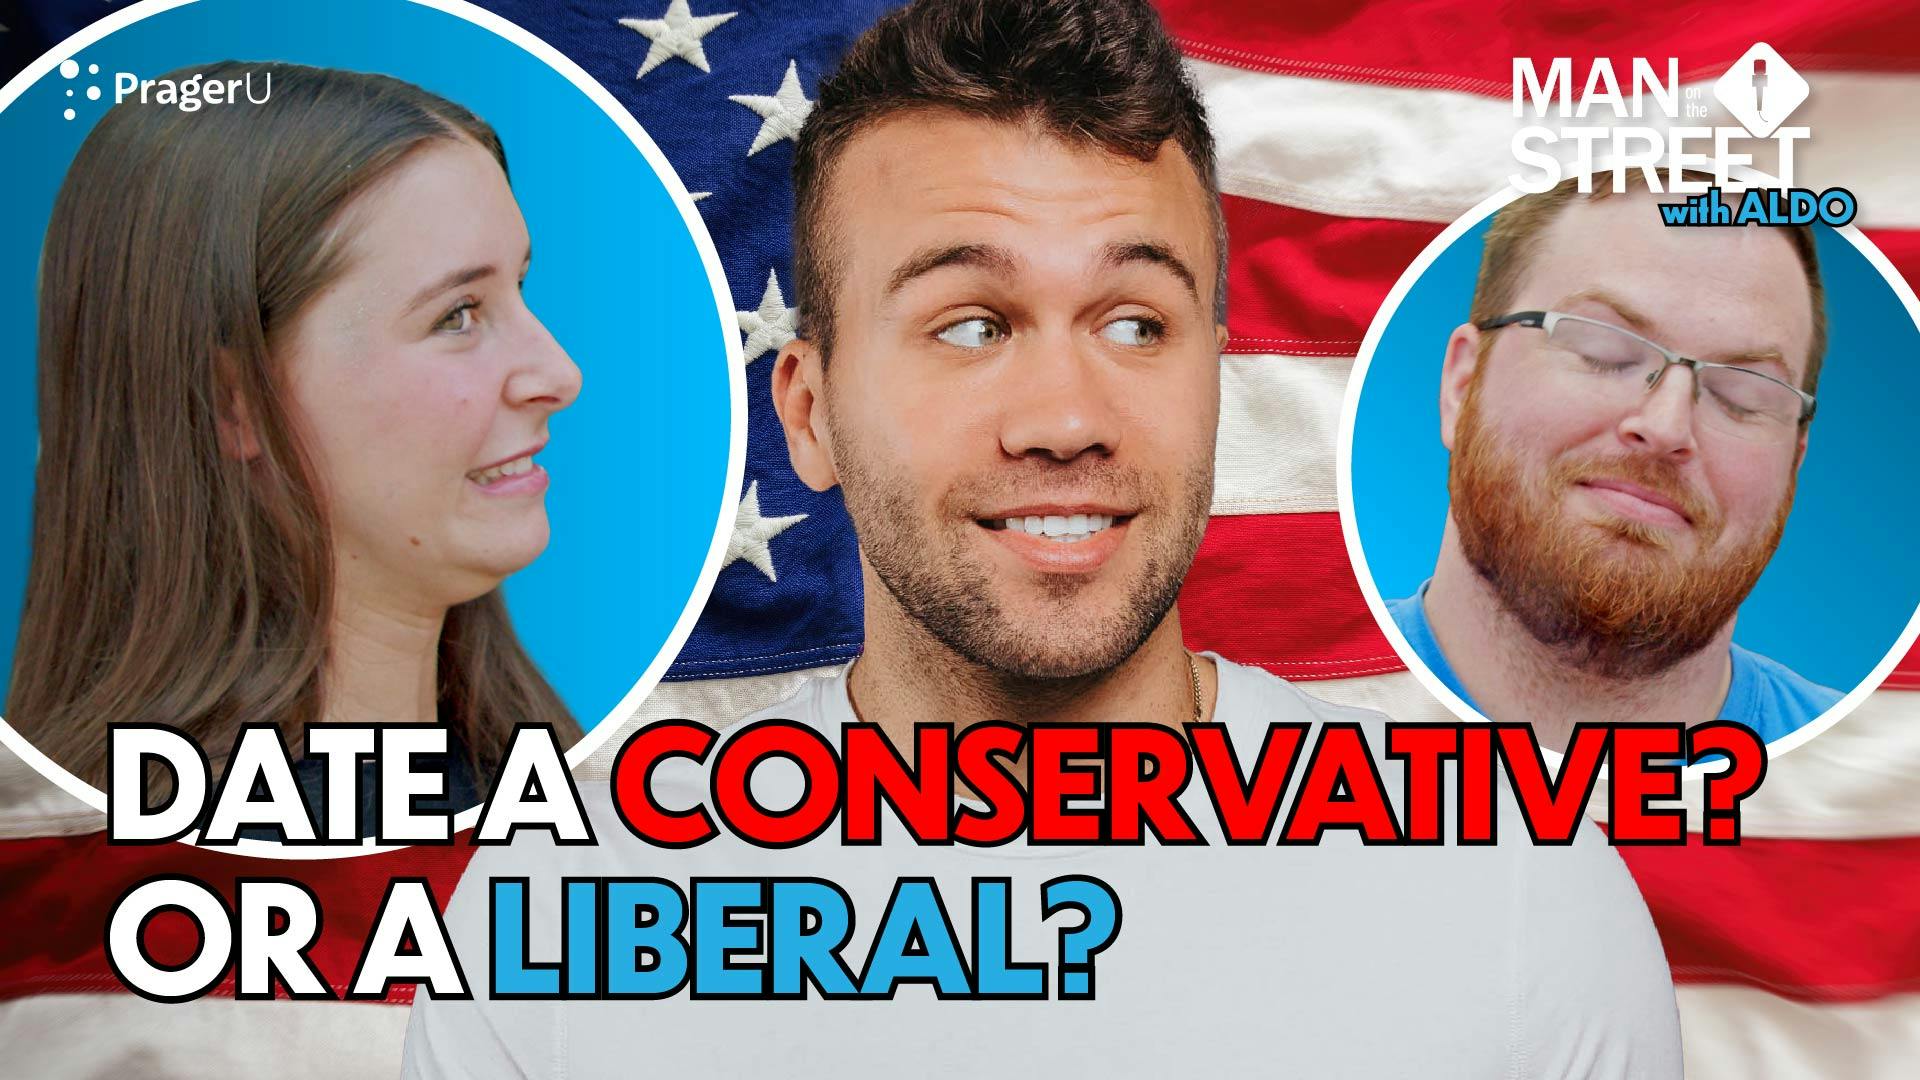 Would You Rather Date a Liberal or a Conservative?